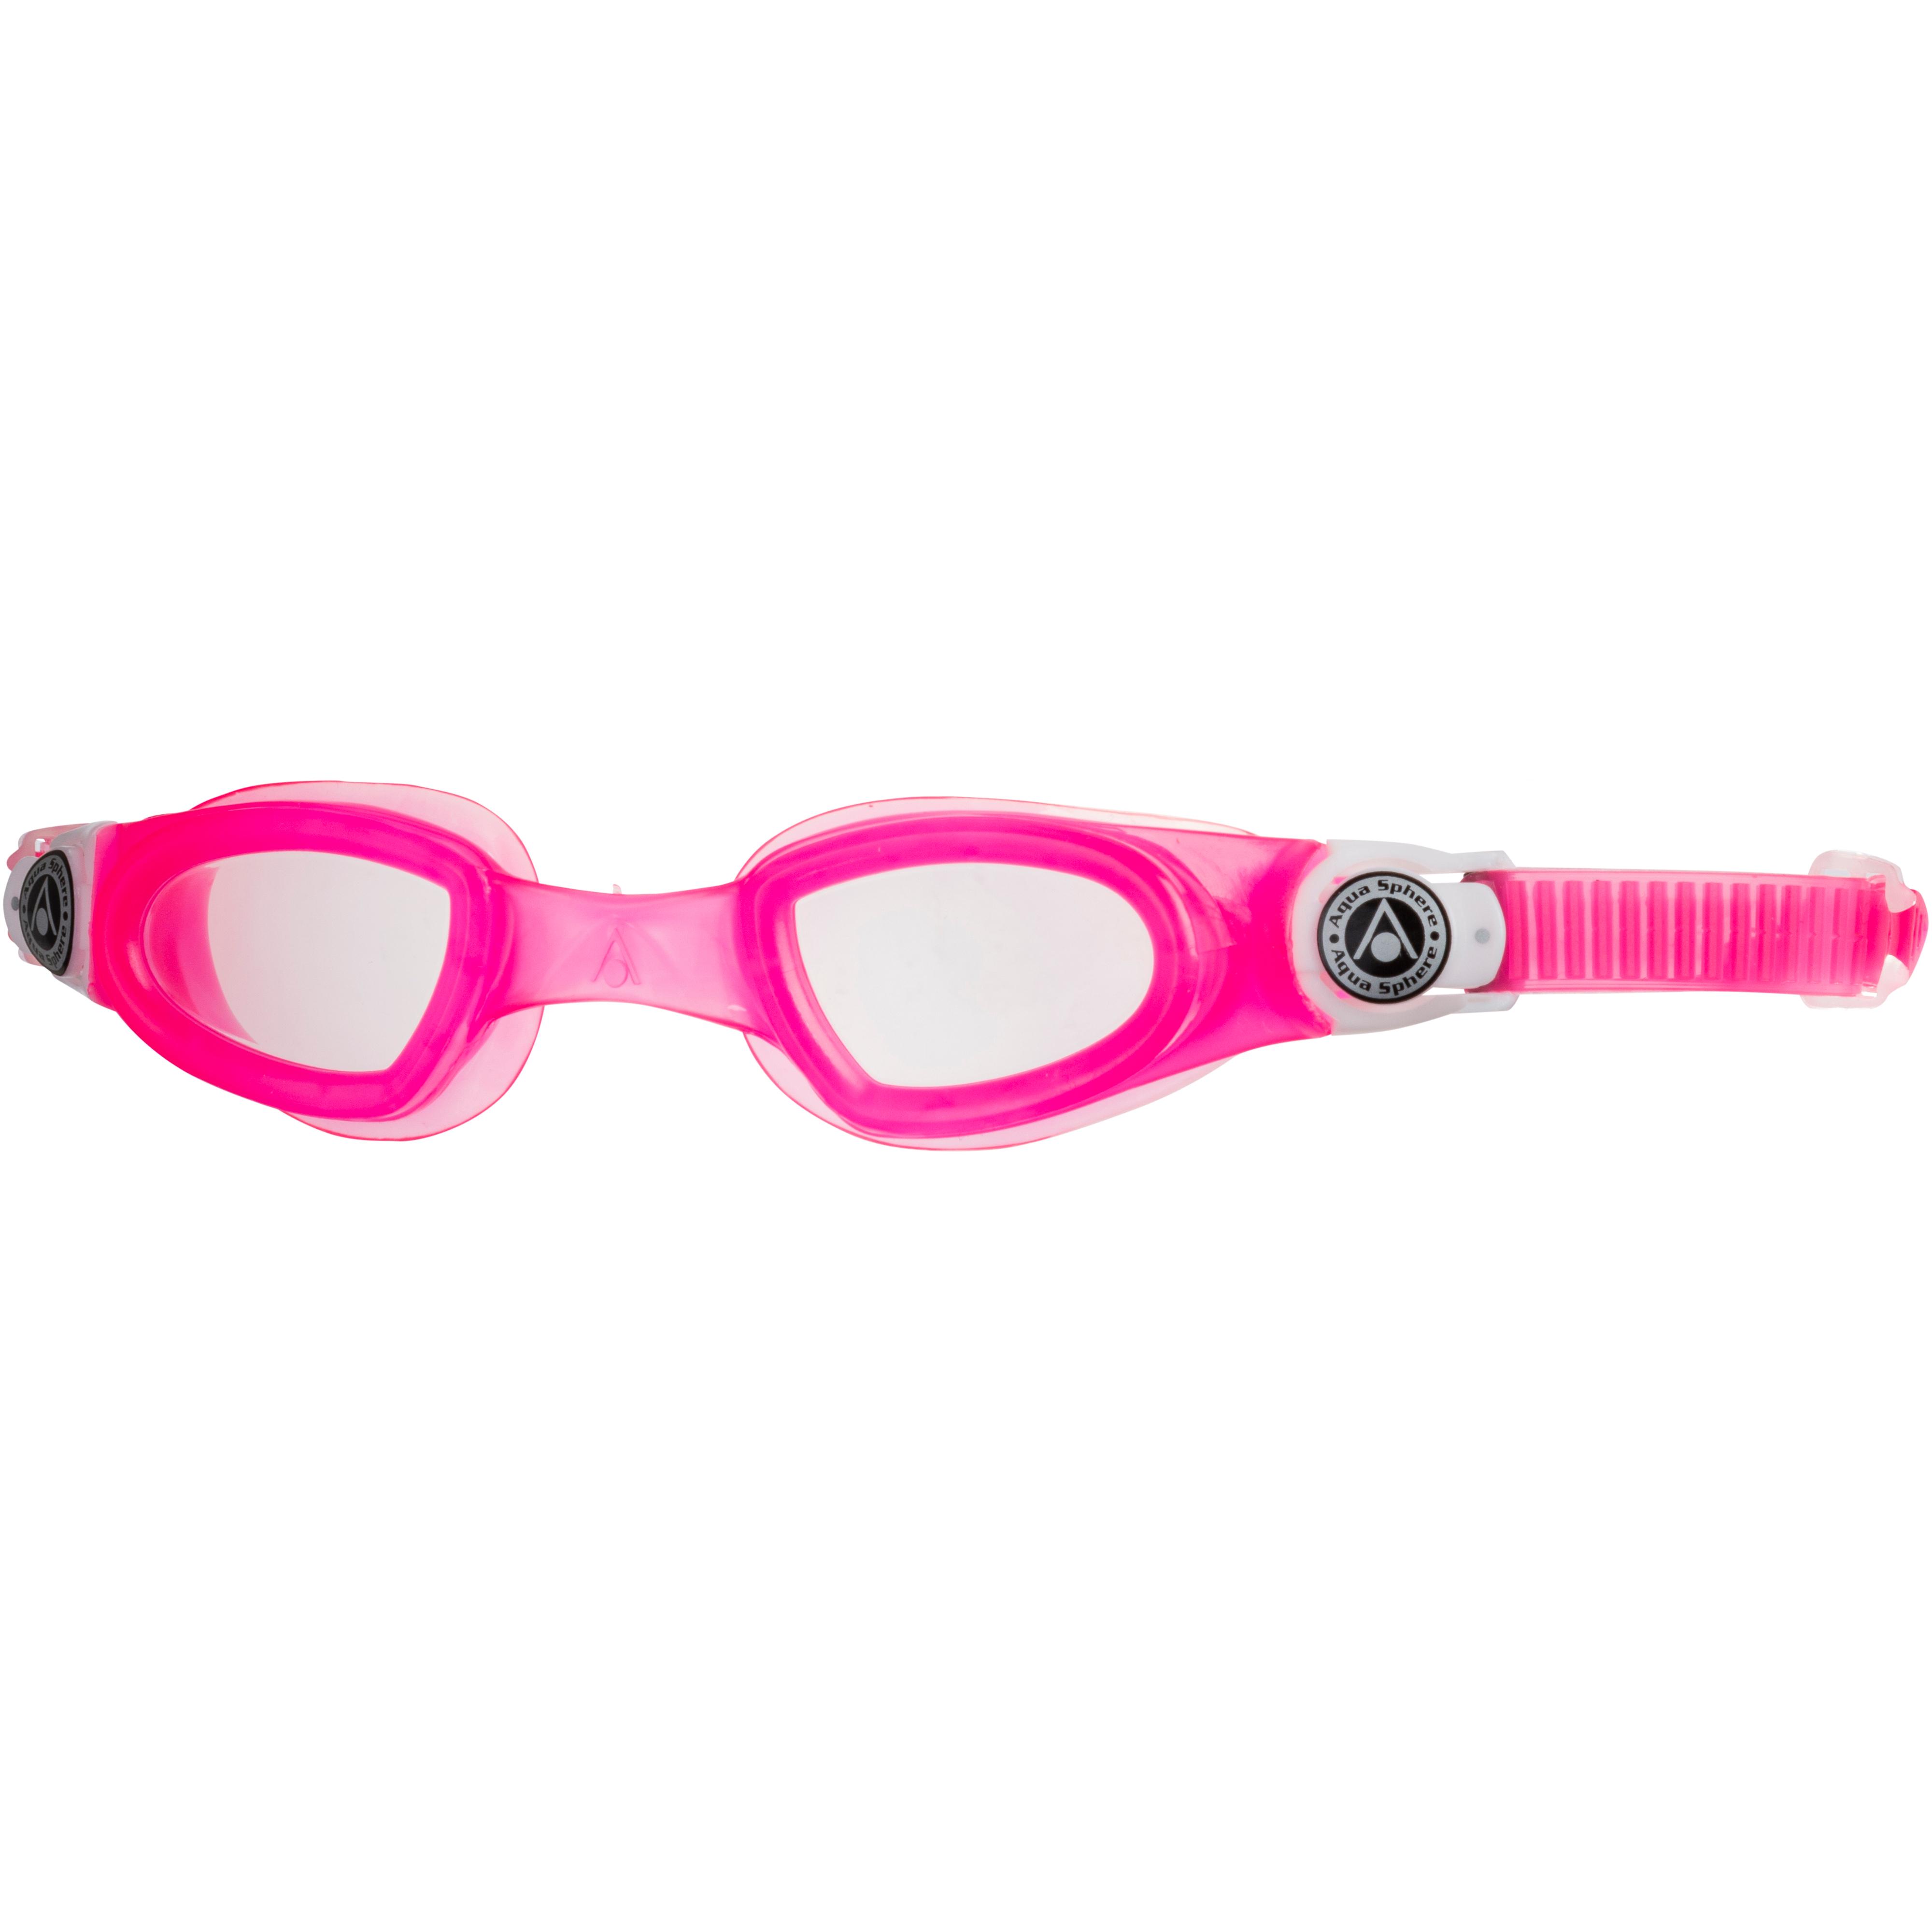 Image of phelps Moby Kid Schwimmbrille Kinder